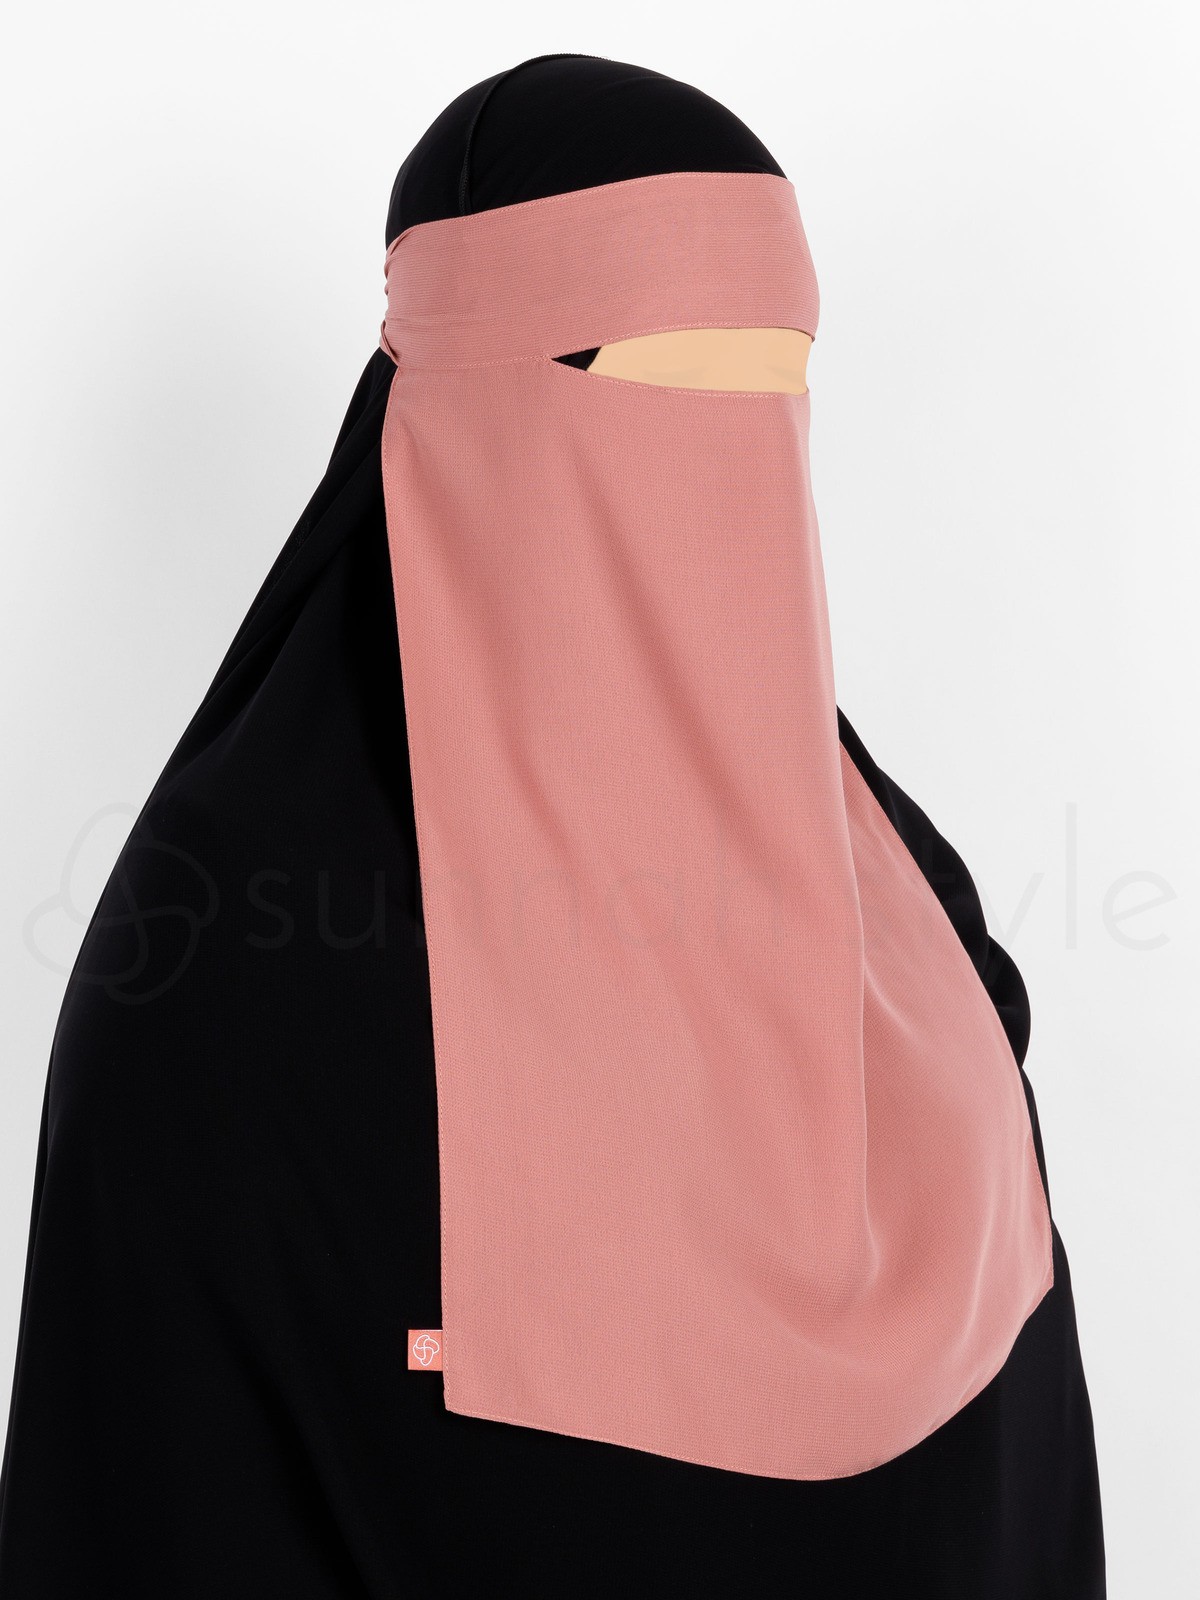 Sunnah Style - One Layer Niqab (Coral)